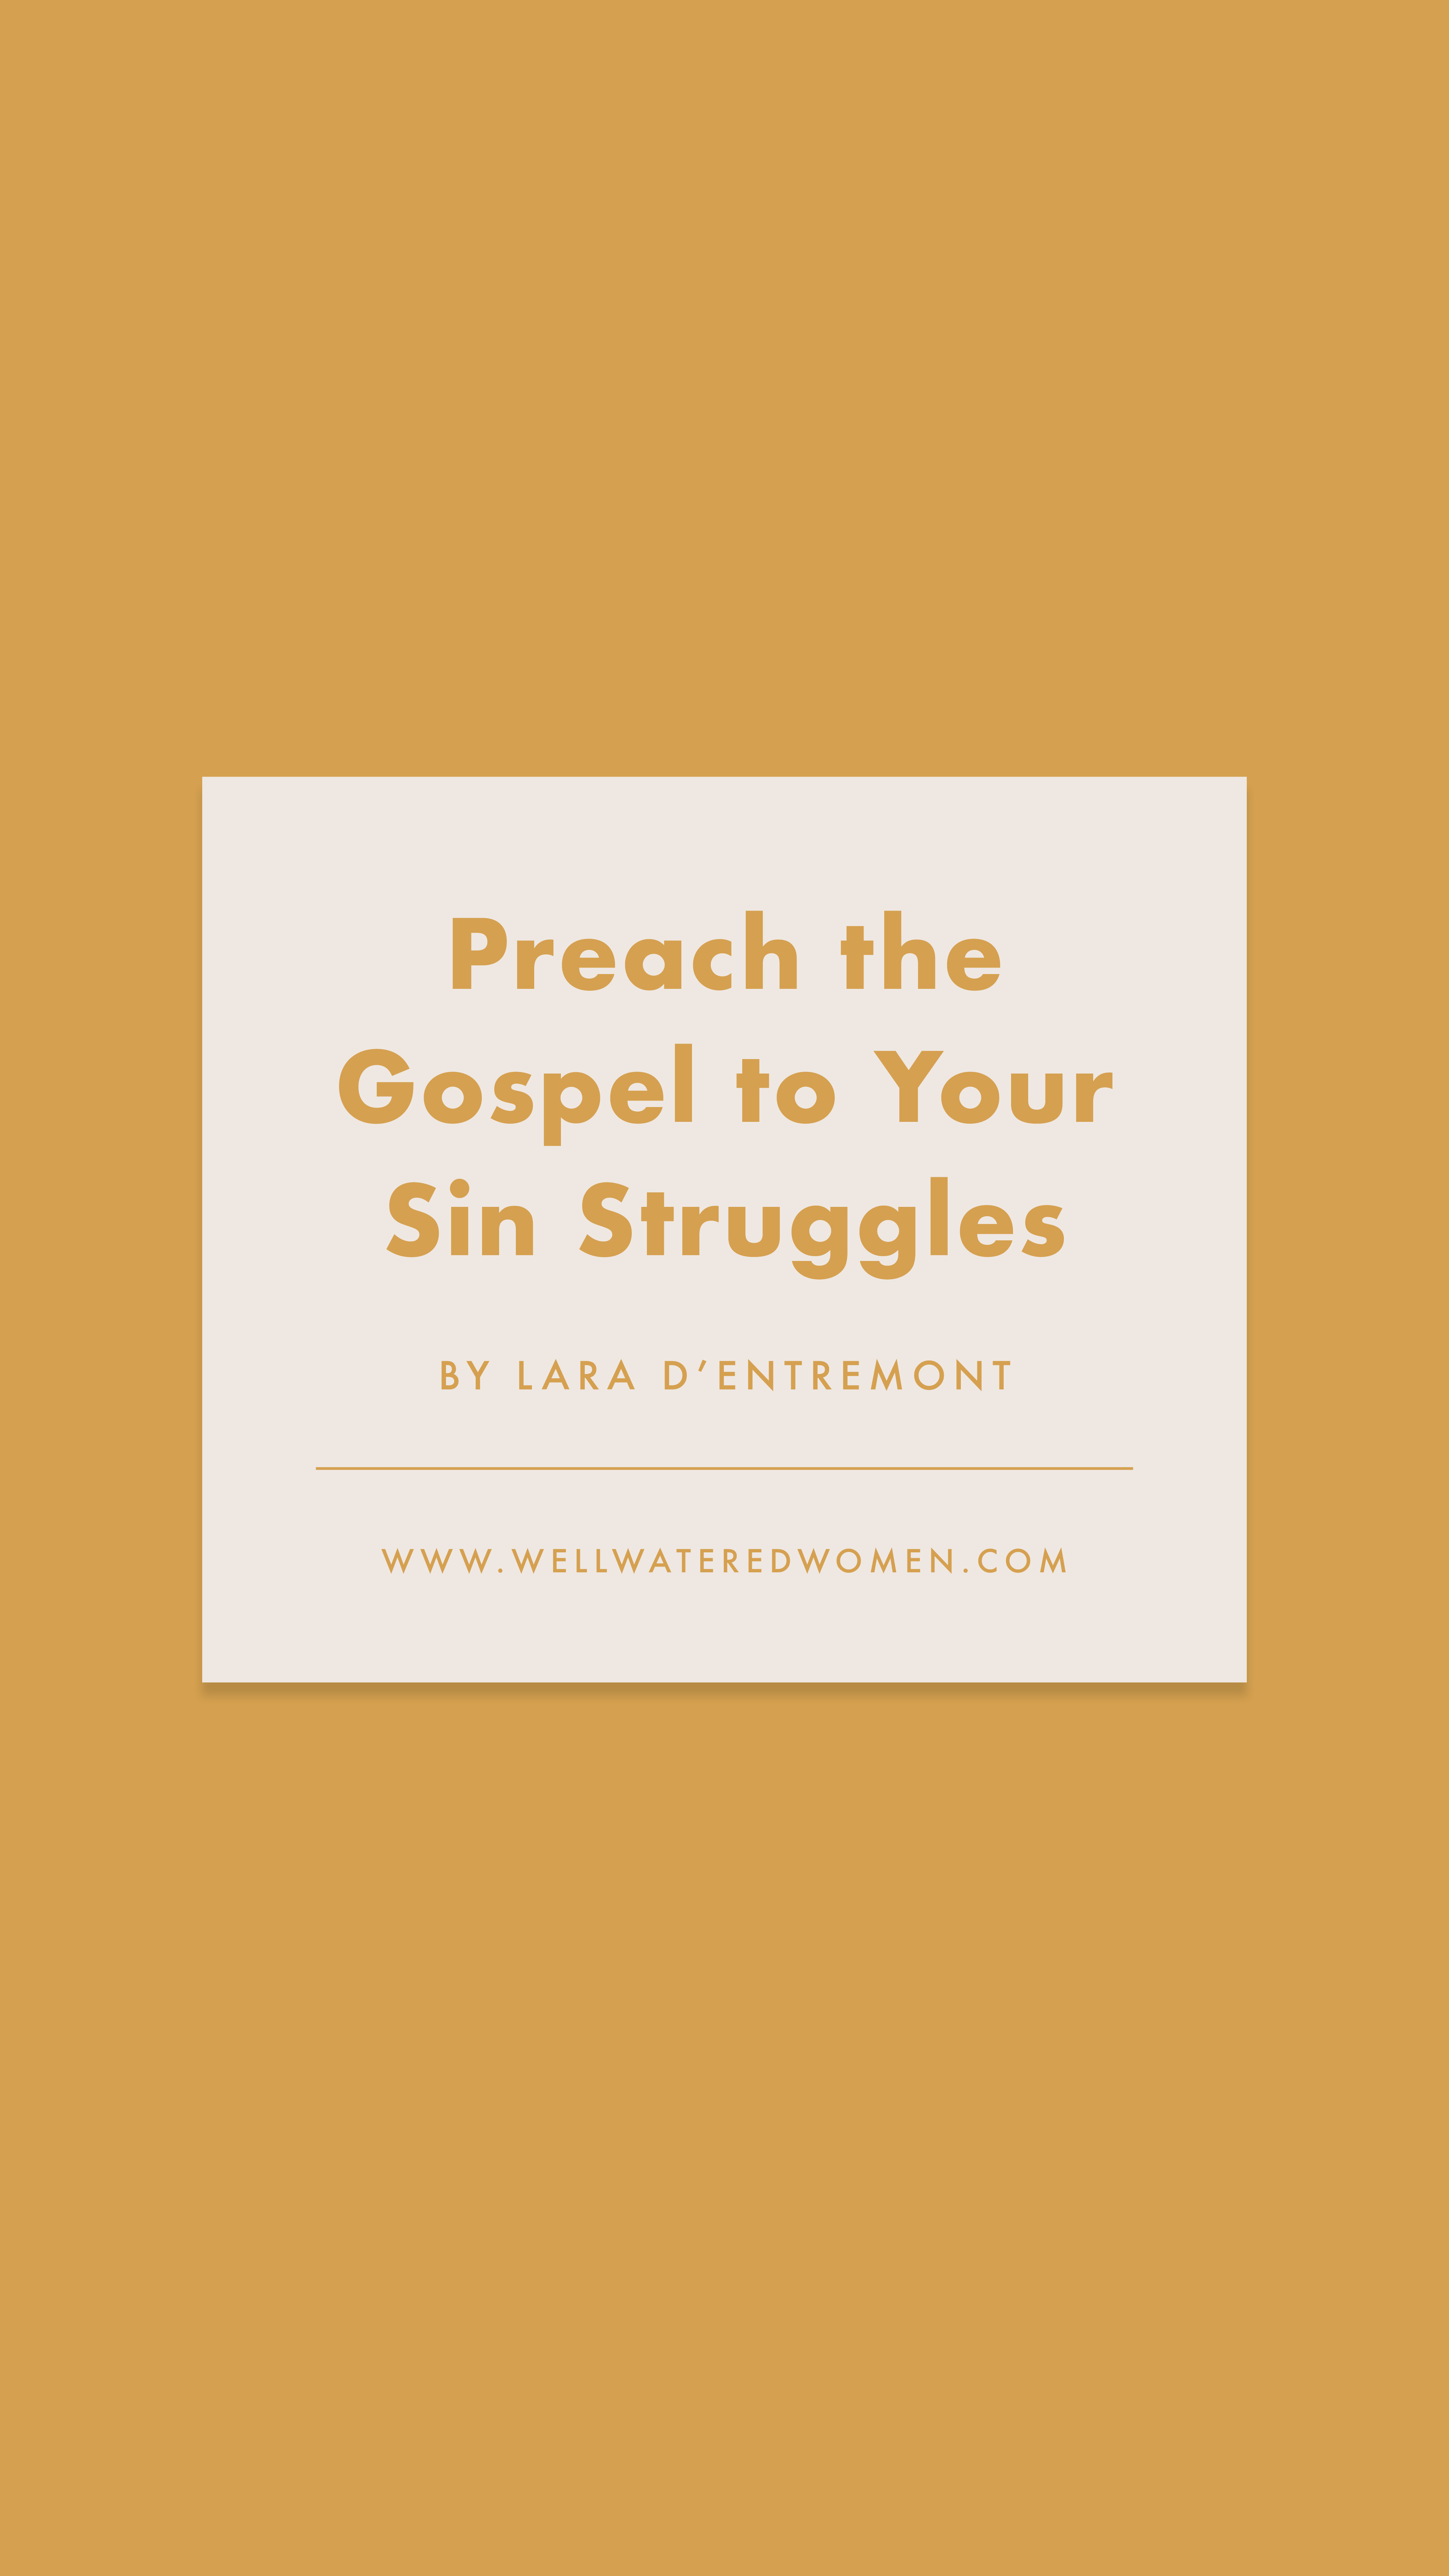 Preach the Gospel to Your Sin Struggles - an Article from Well-Watered Women - slide